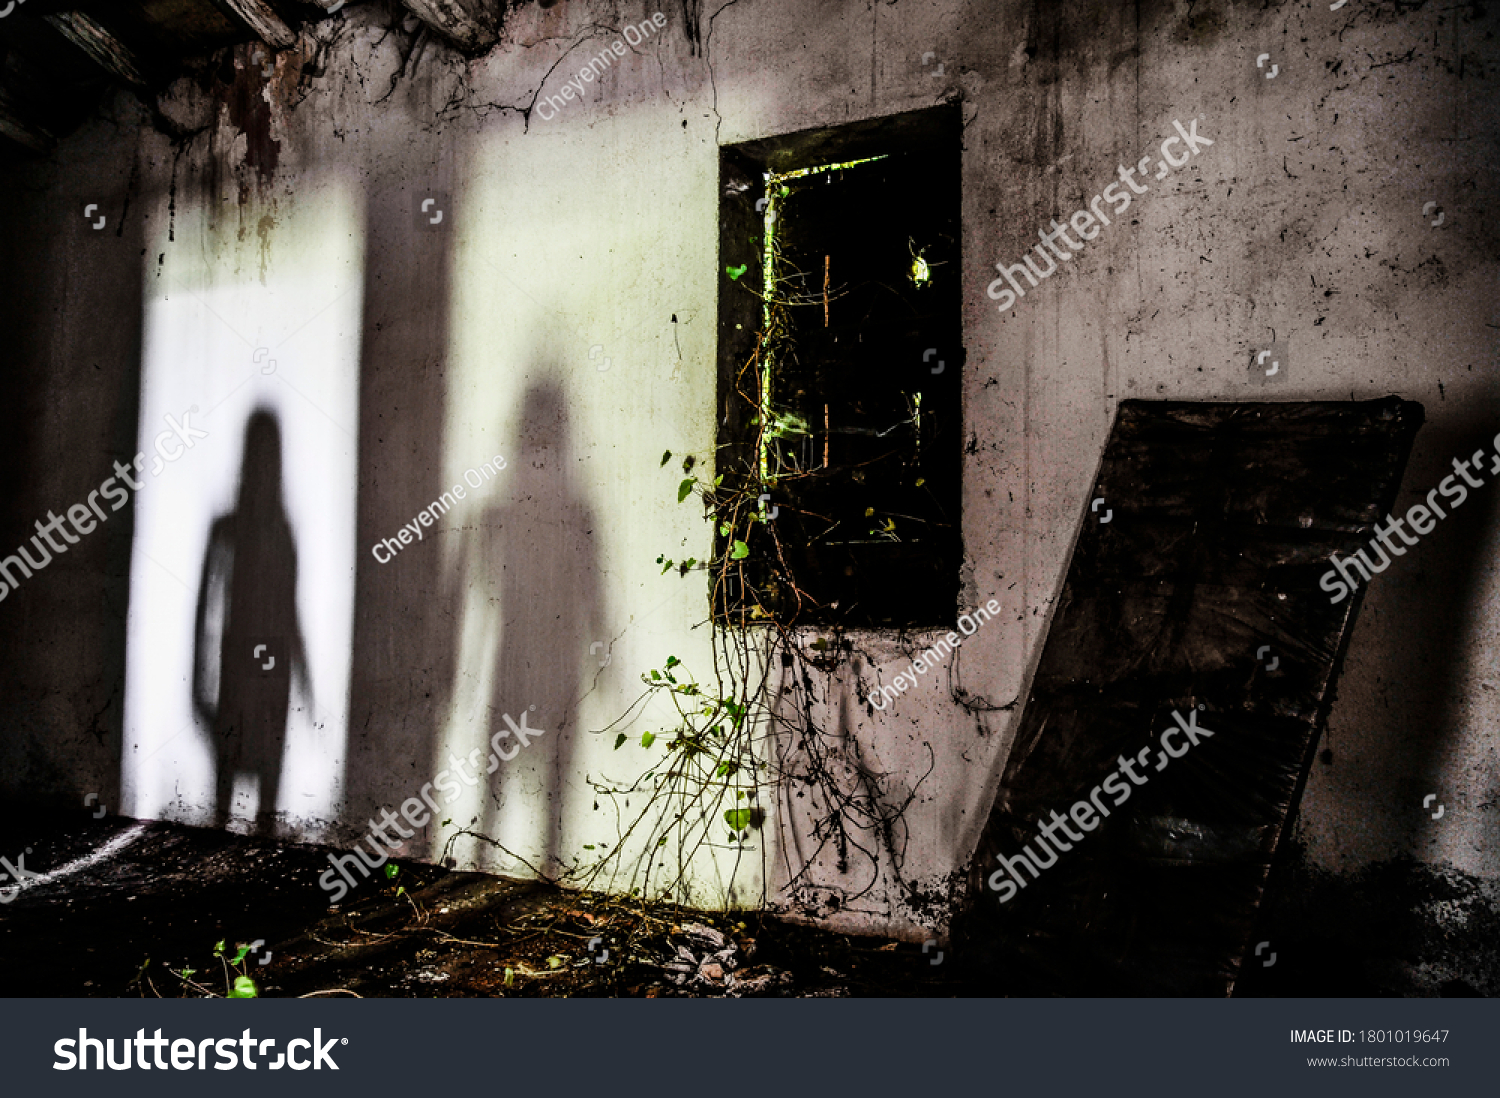 Mysterious shadow of a woman in an abandoned house - Silhouette of female ghost standing on the door of the room - Fear concept in abandoned house - Halloween concept #1801019647